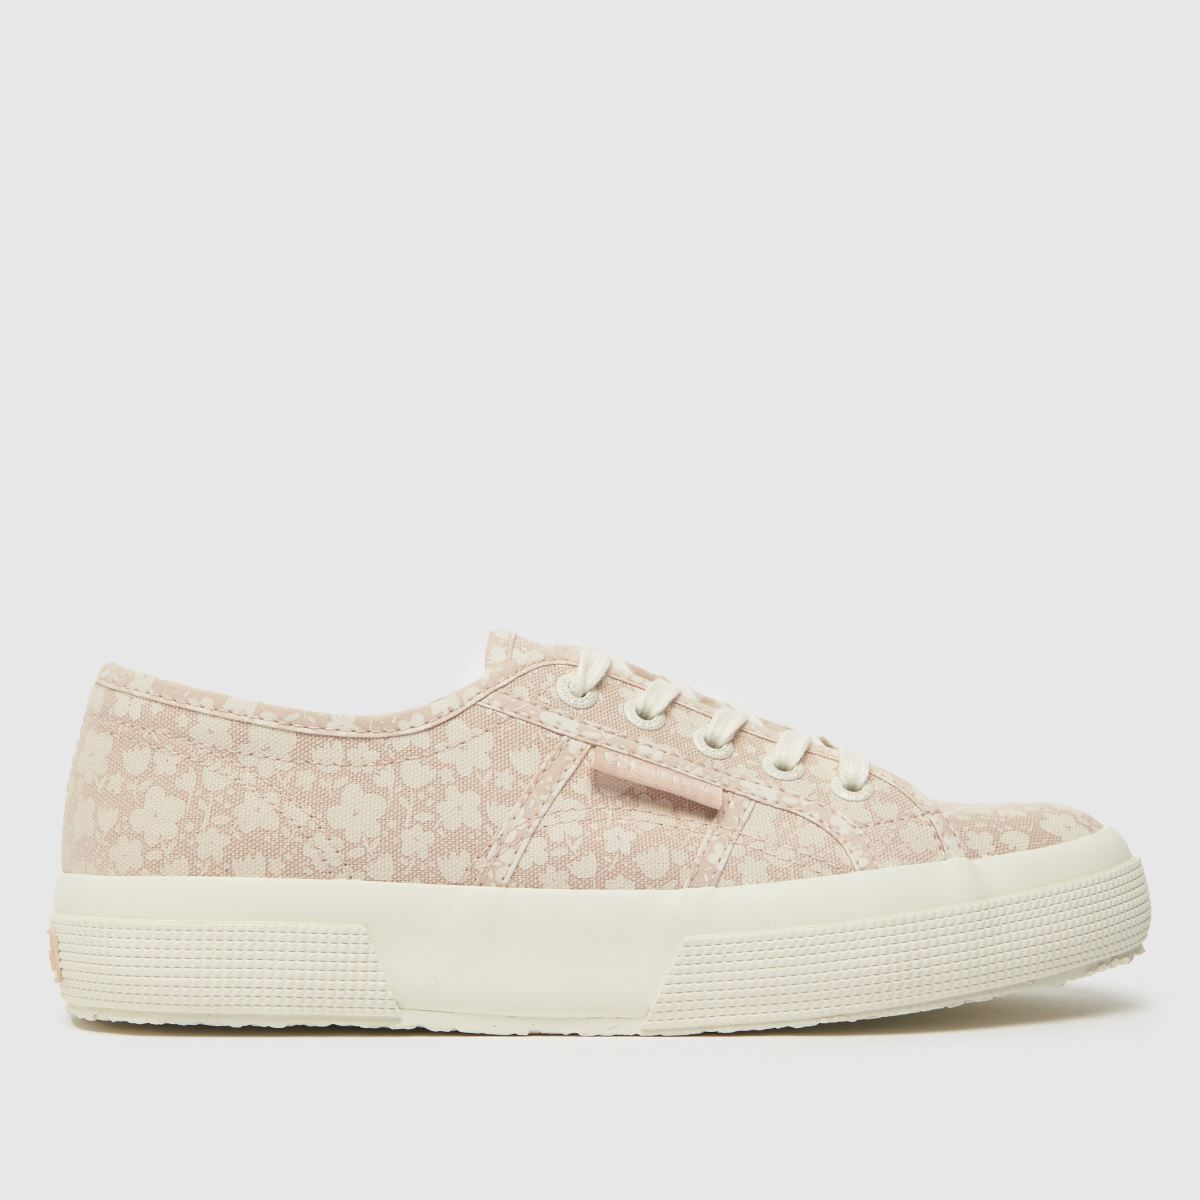 Superga Pale Pink 2750 Trainers